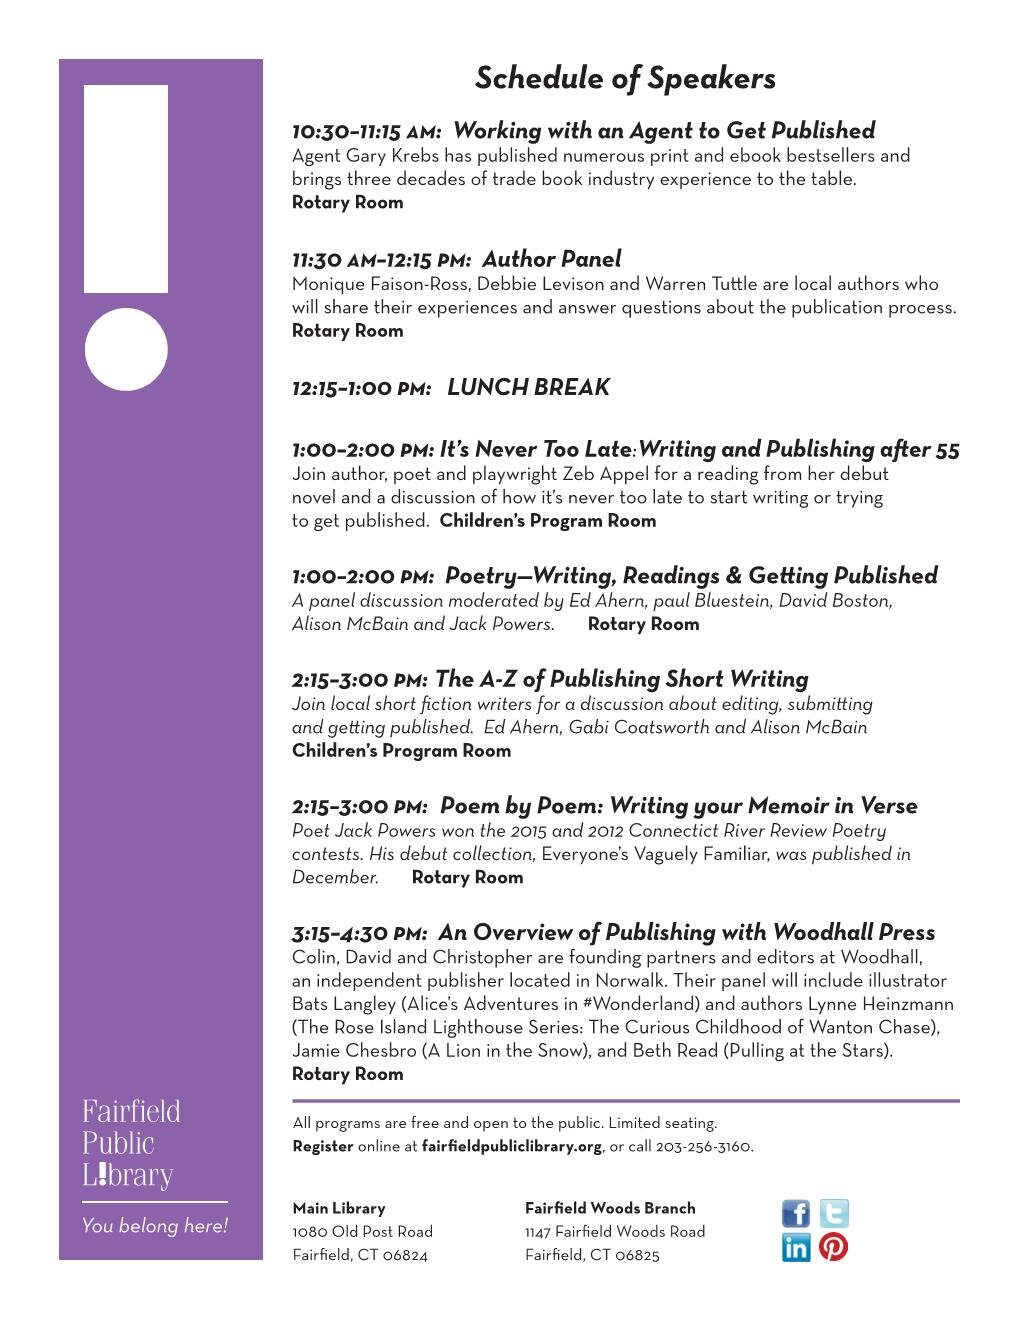 Fairfield Writers Conference Brochure-2019-11-02 Page 002.jpg